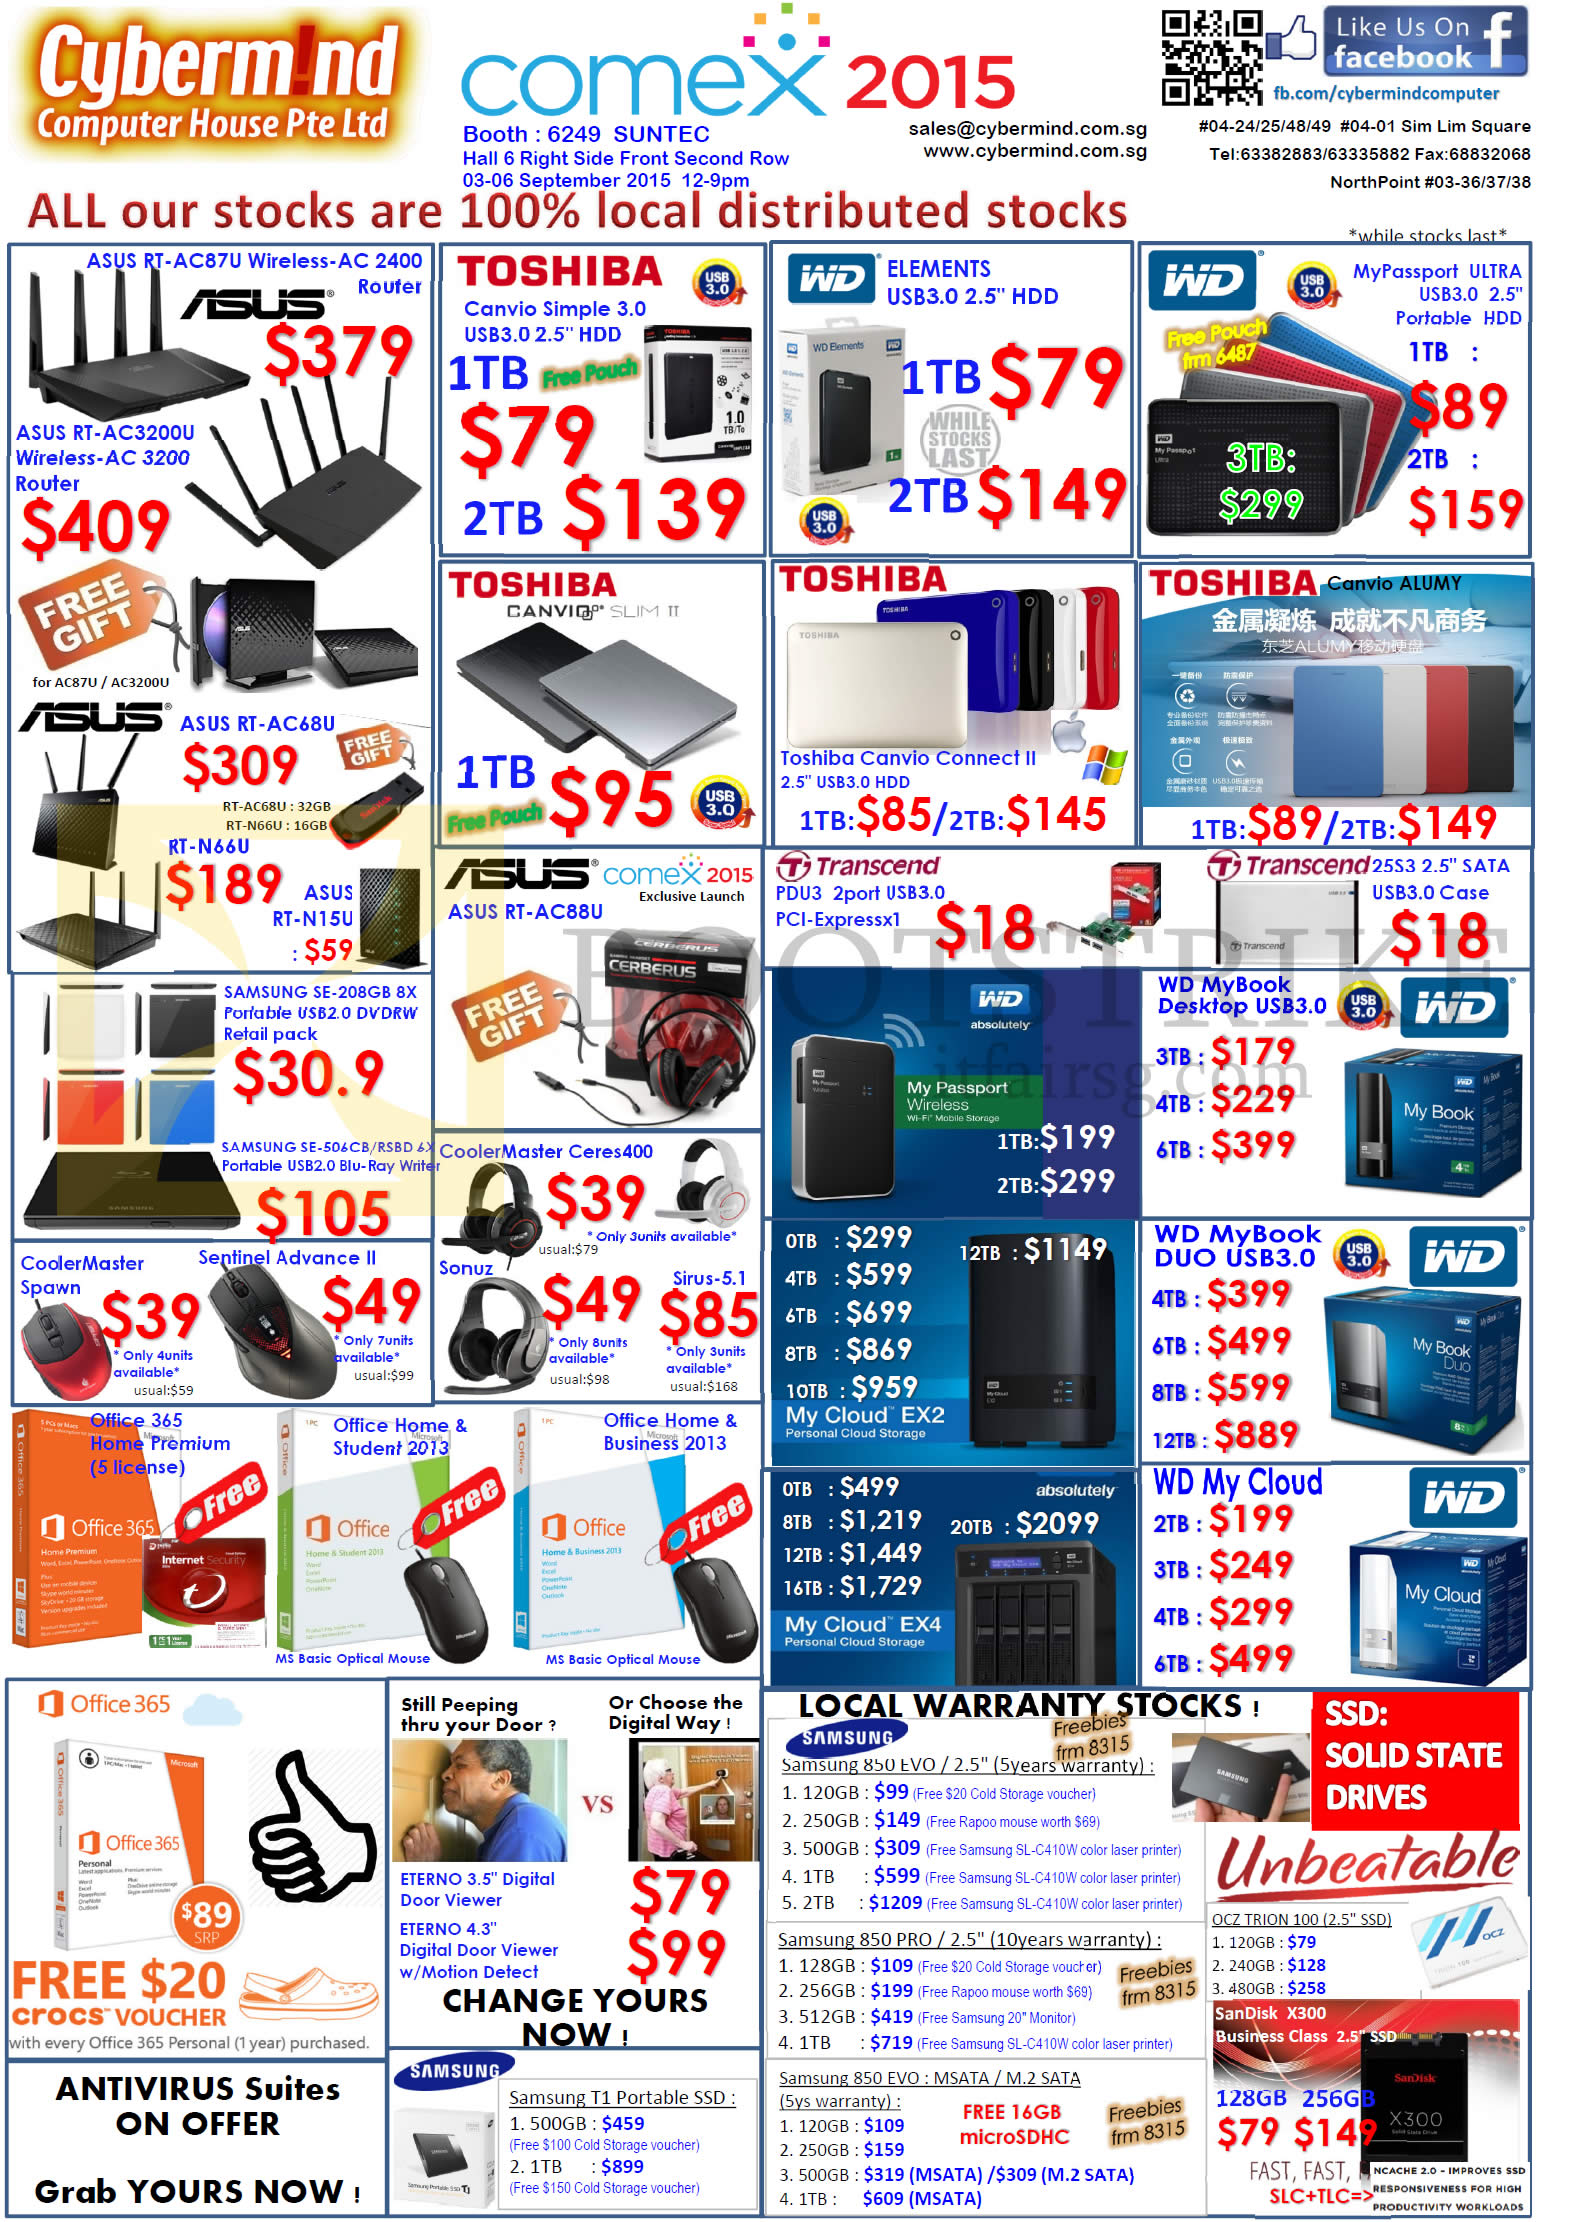 COMEX 2015 price list image brochure of Cybermind Networking Routers, External Storage Drives, SSD, Headphones, Mouse, Ffice 365, Office Home, Samsung 850 Pro Evo, WD Western Digital Elements Passport, Toshiba Canvio